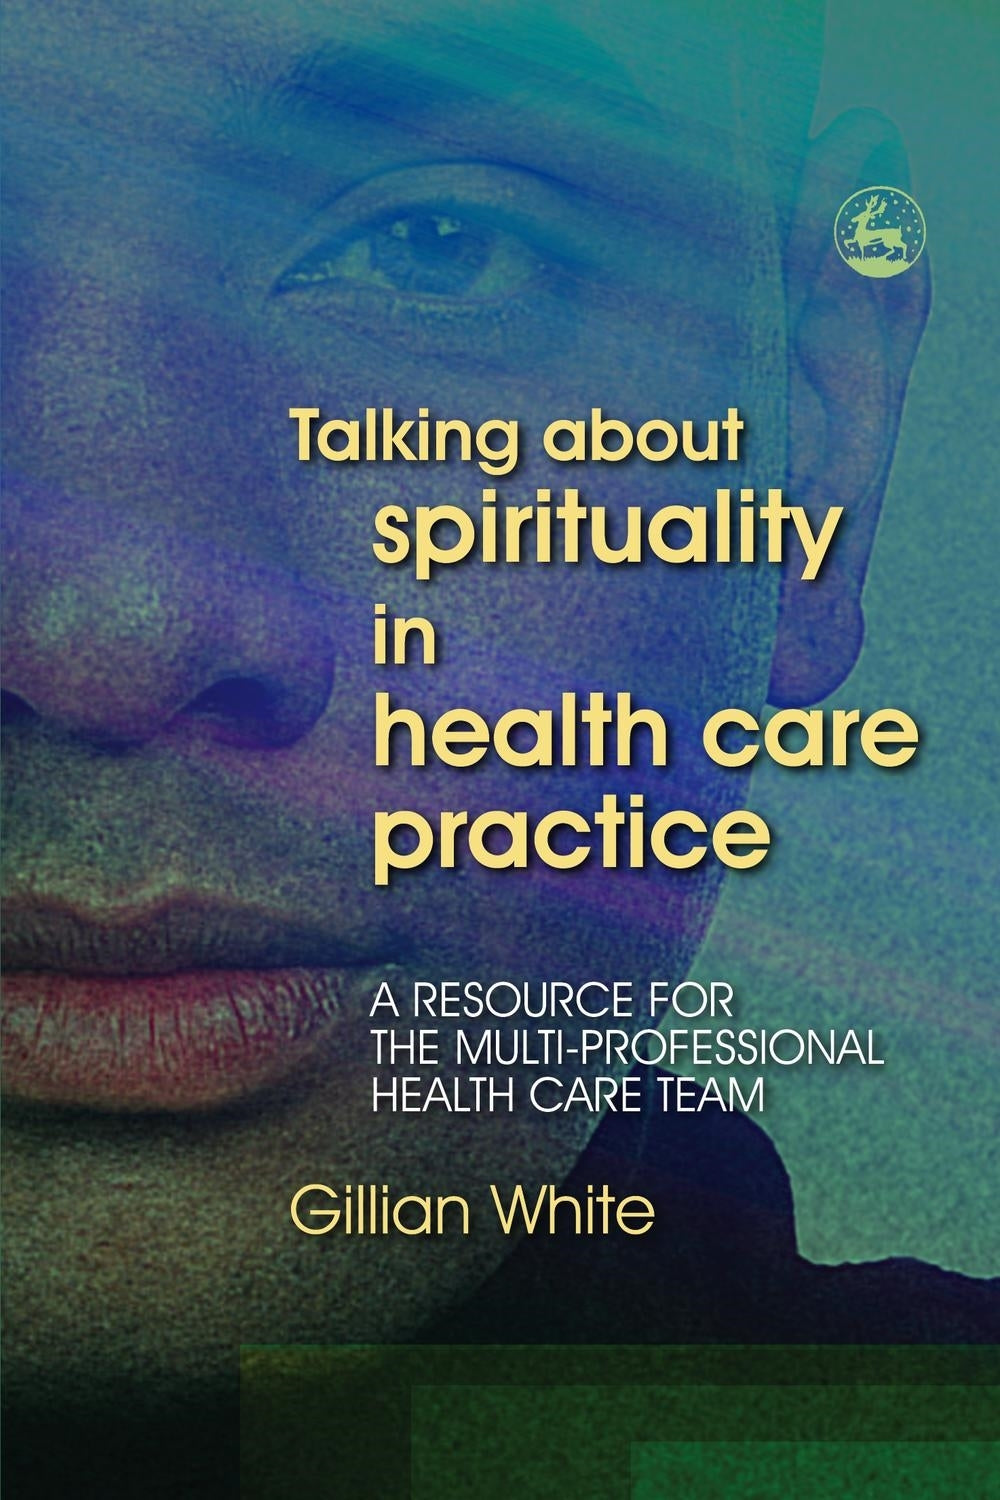 Talking About Spirituality in Health Care Practice by Gillian White